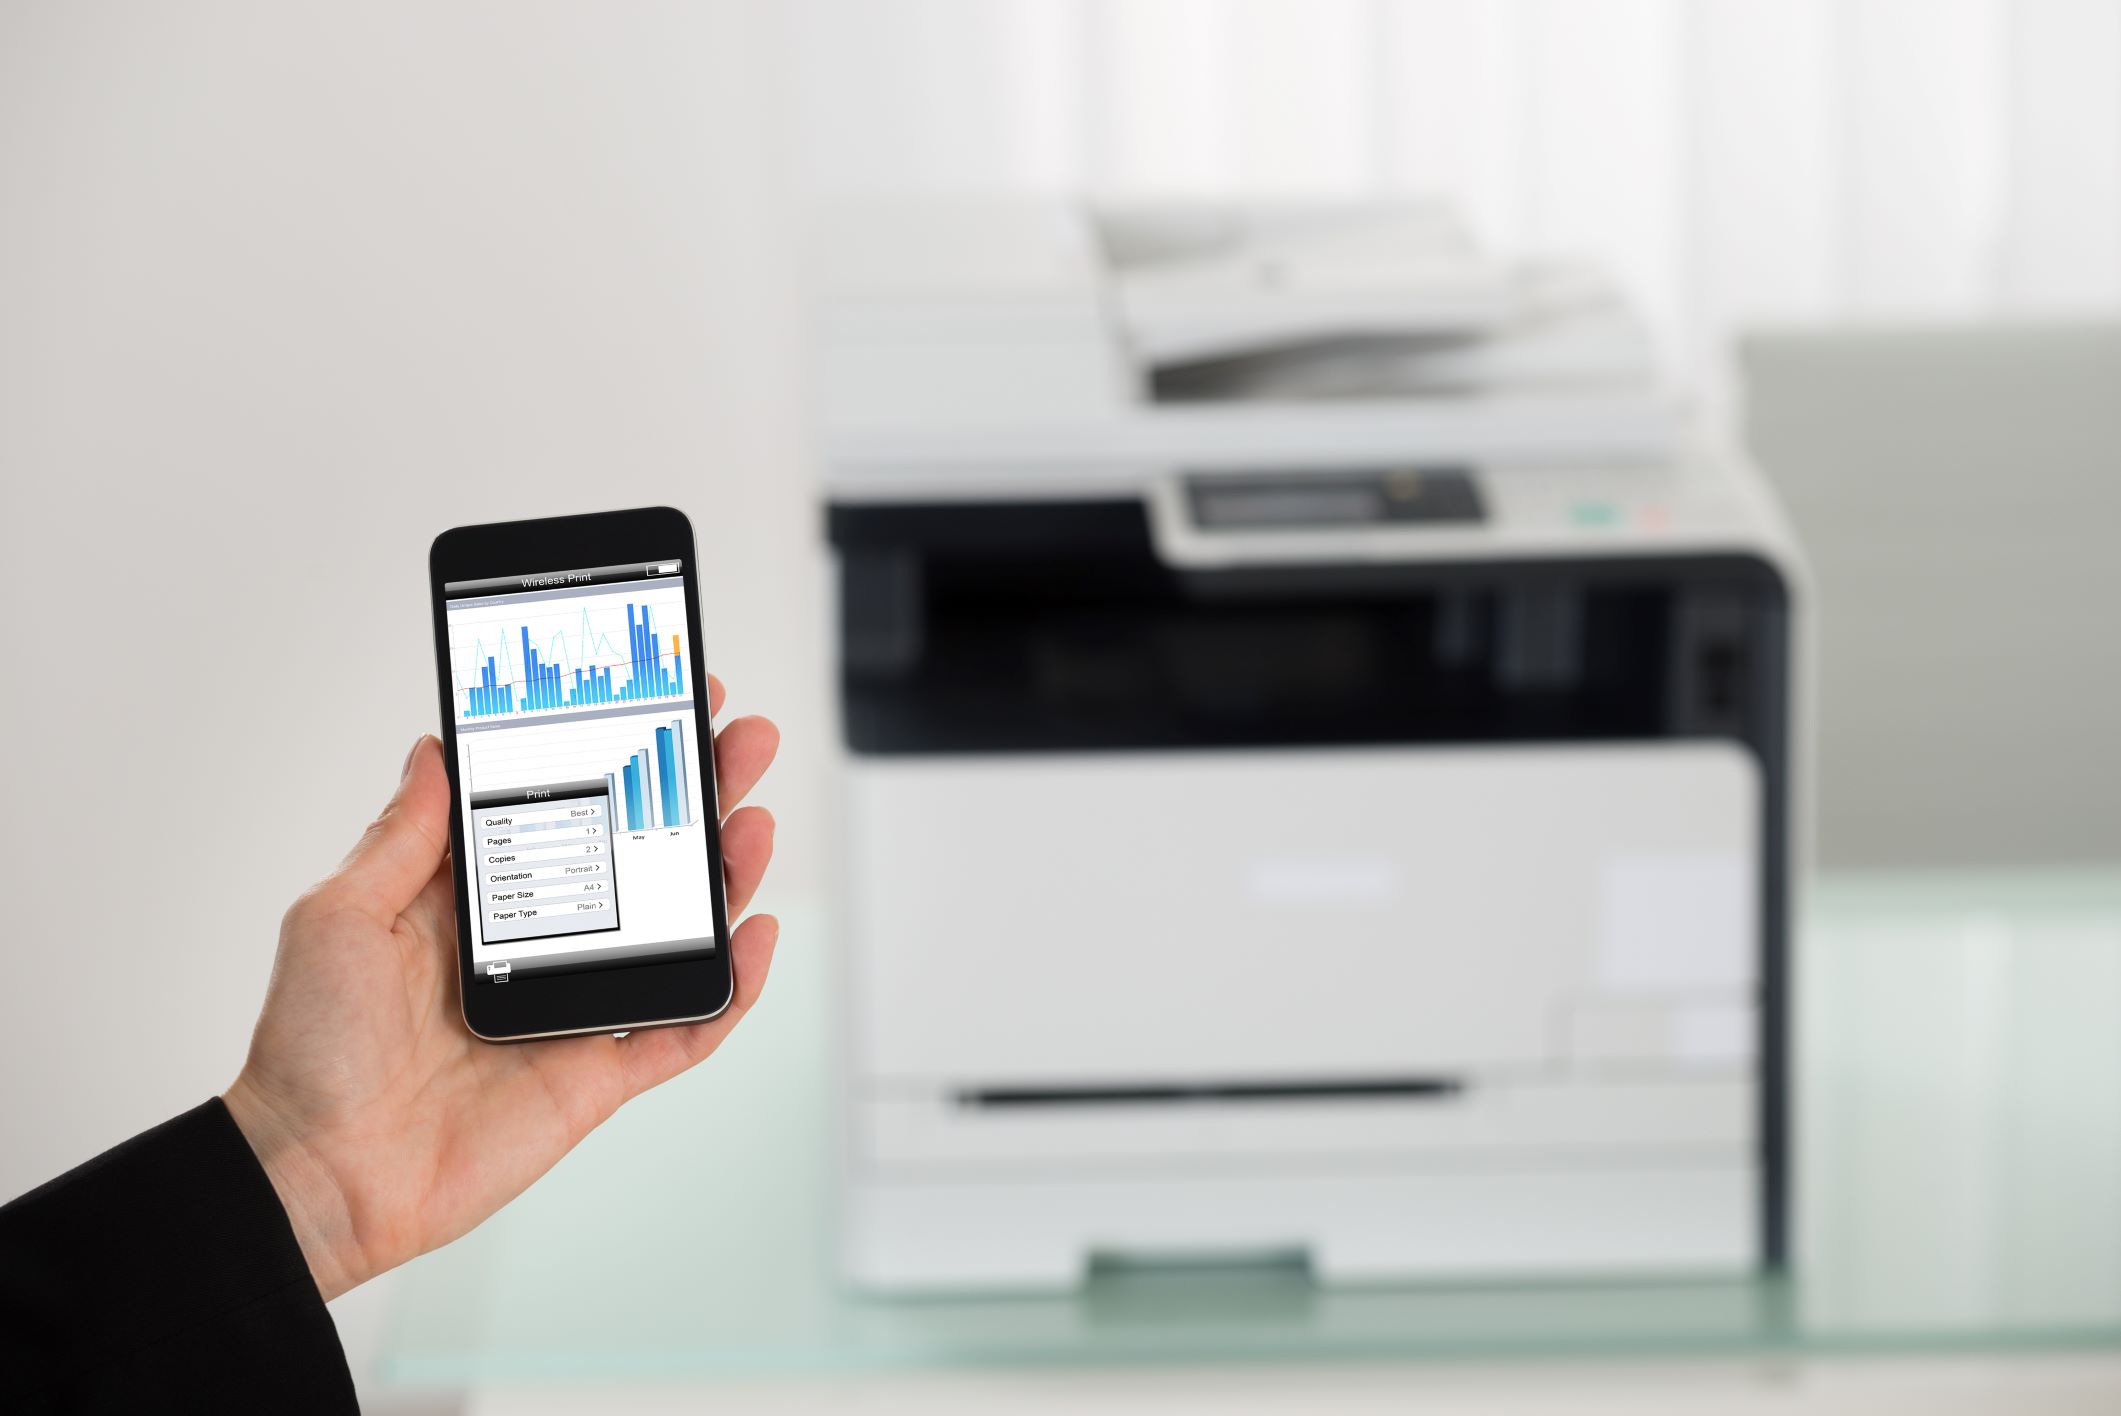 A hand holding a smartphone with a graph on the screen, symbolizing data analysis, with a large multifunctional office printer in the blurred background, representing the convenience of mobile printing technology in a modern office setting.